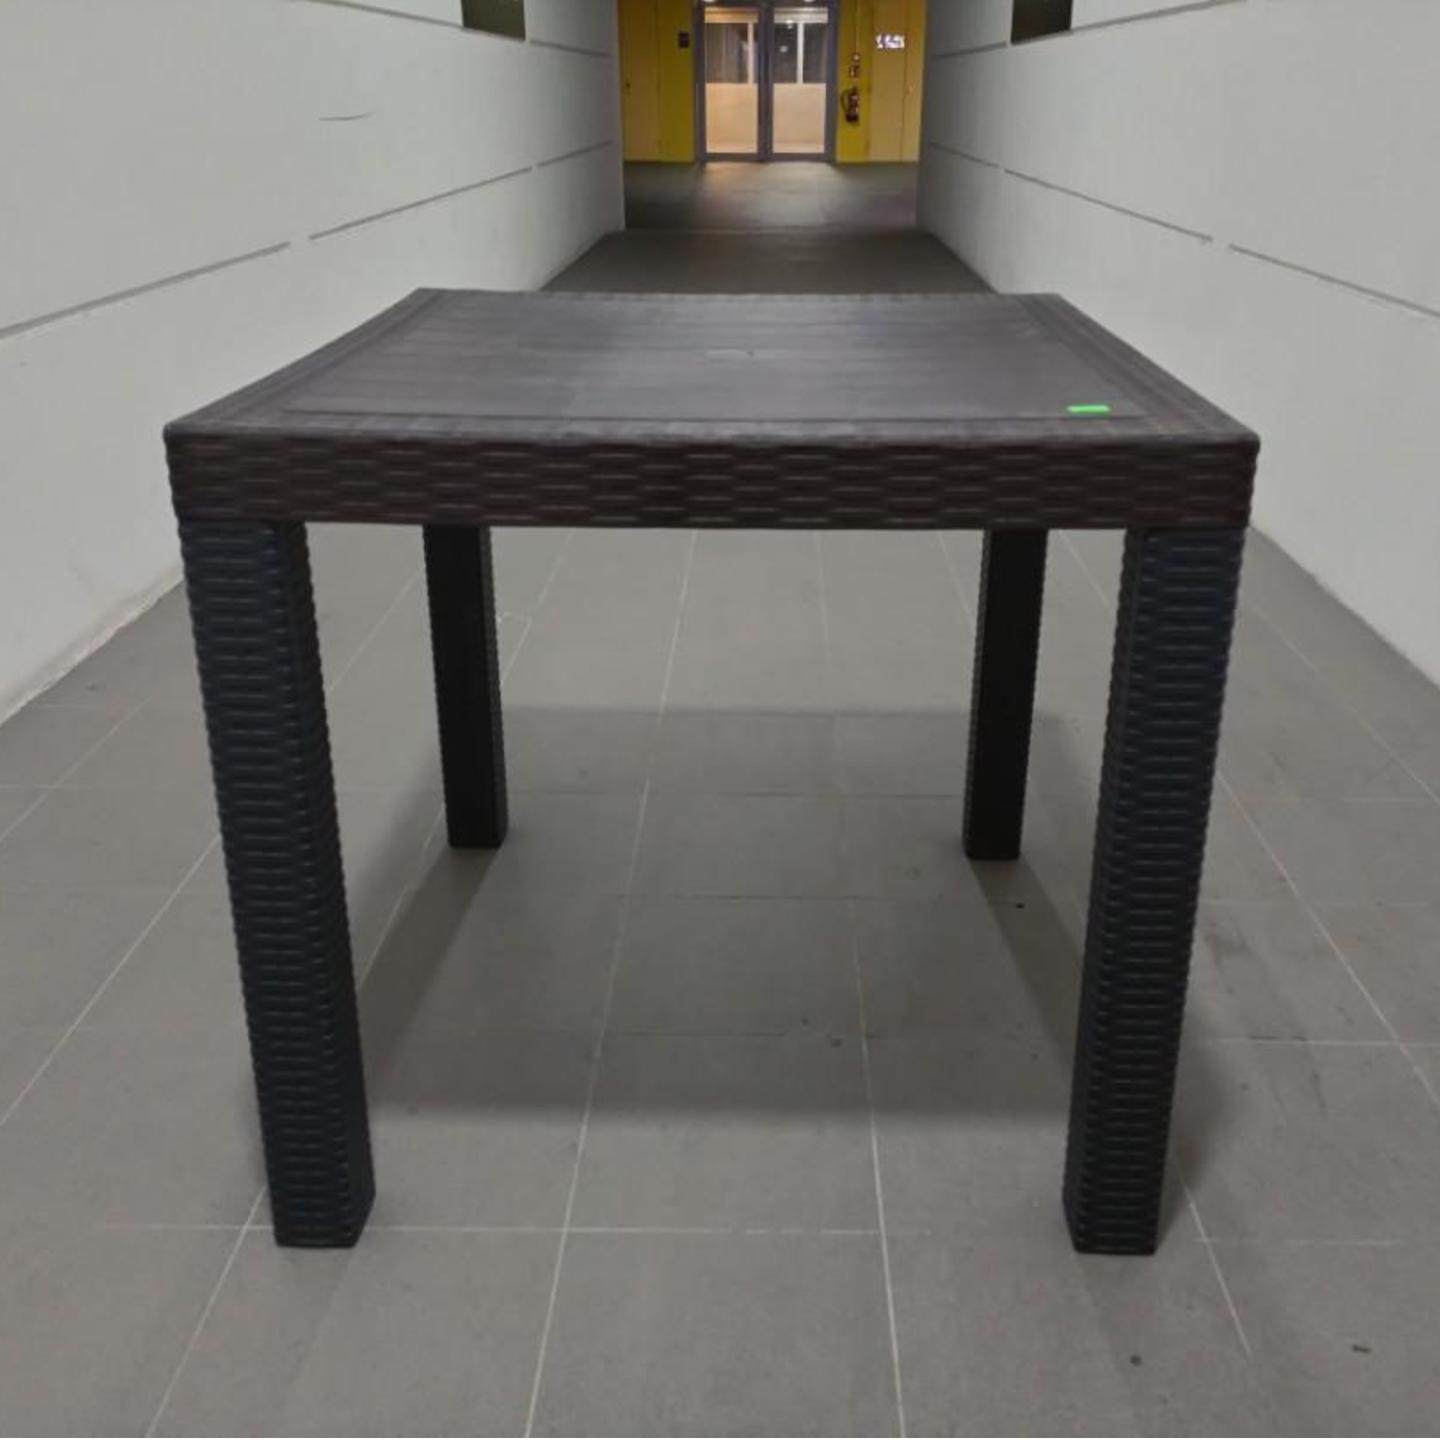 LORRAINE SQUARE Outdoor Dining Table in GREY